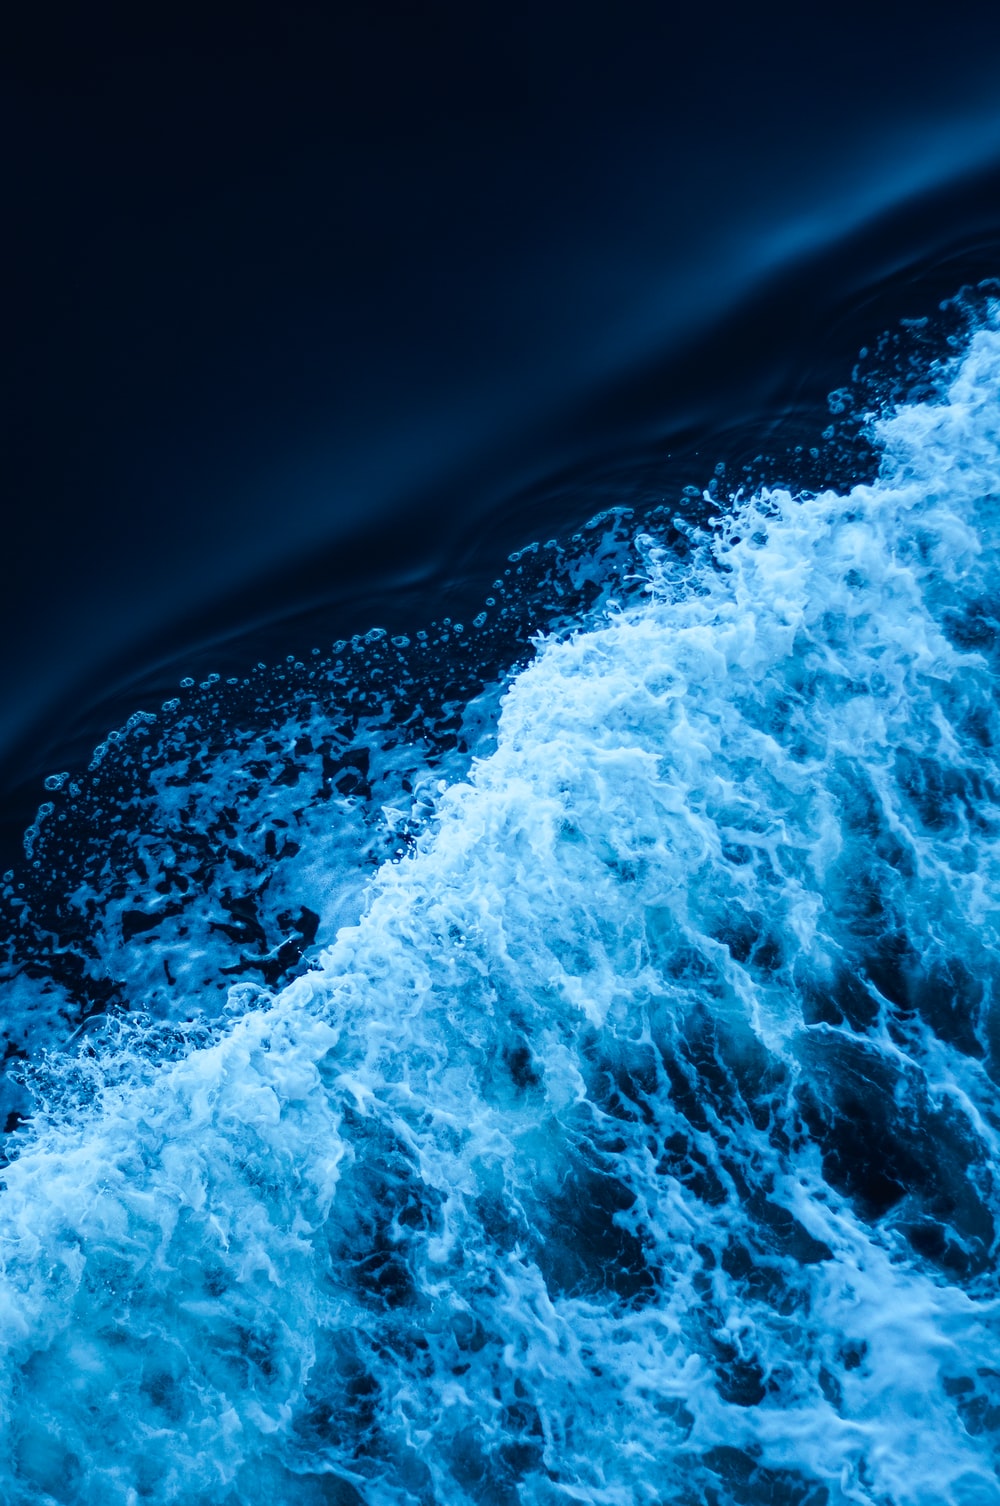 Dark Blue Water Pictures Image